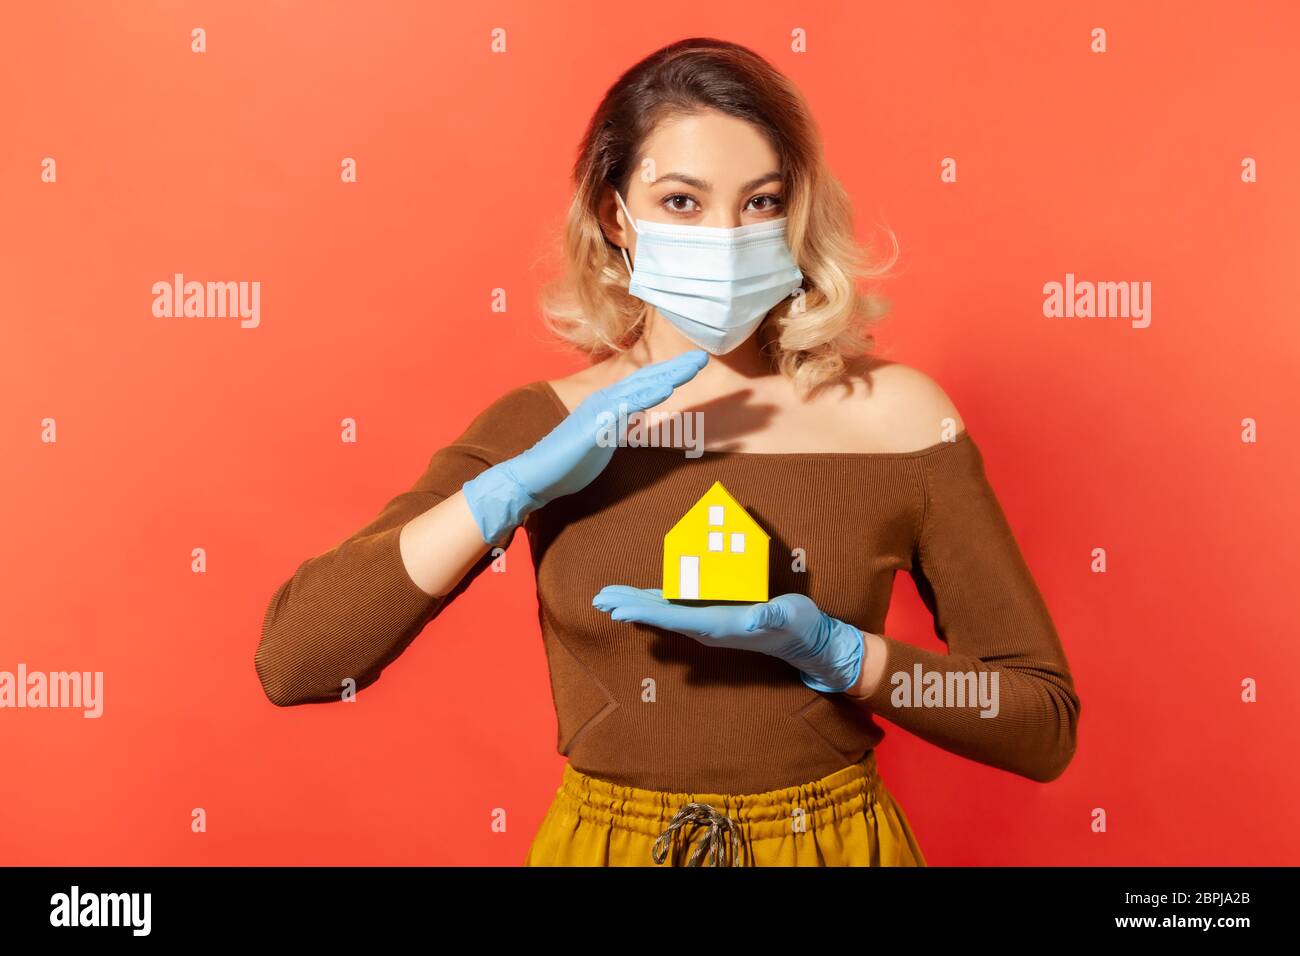 Blond woman in protective mask and gloves holding paper house as symbol of safety and care, recommendation adhere quarantine while contagious disease Stock Photo